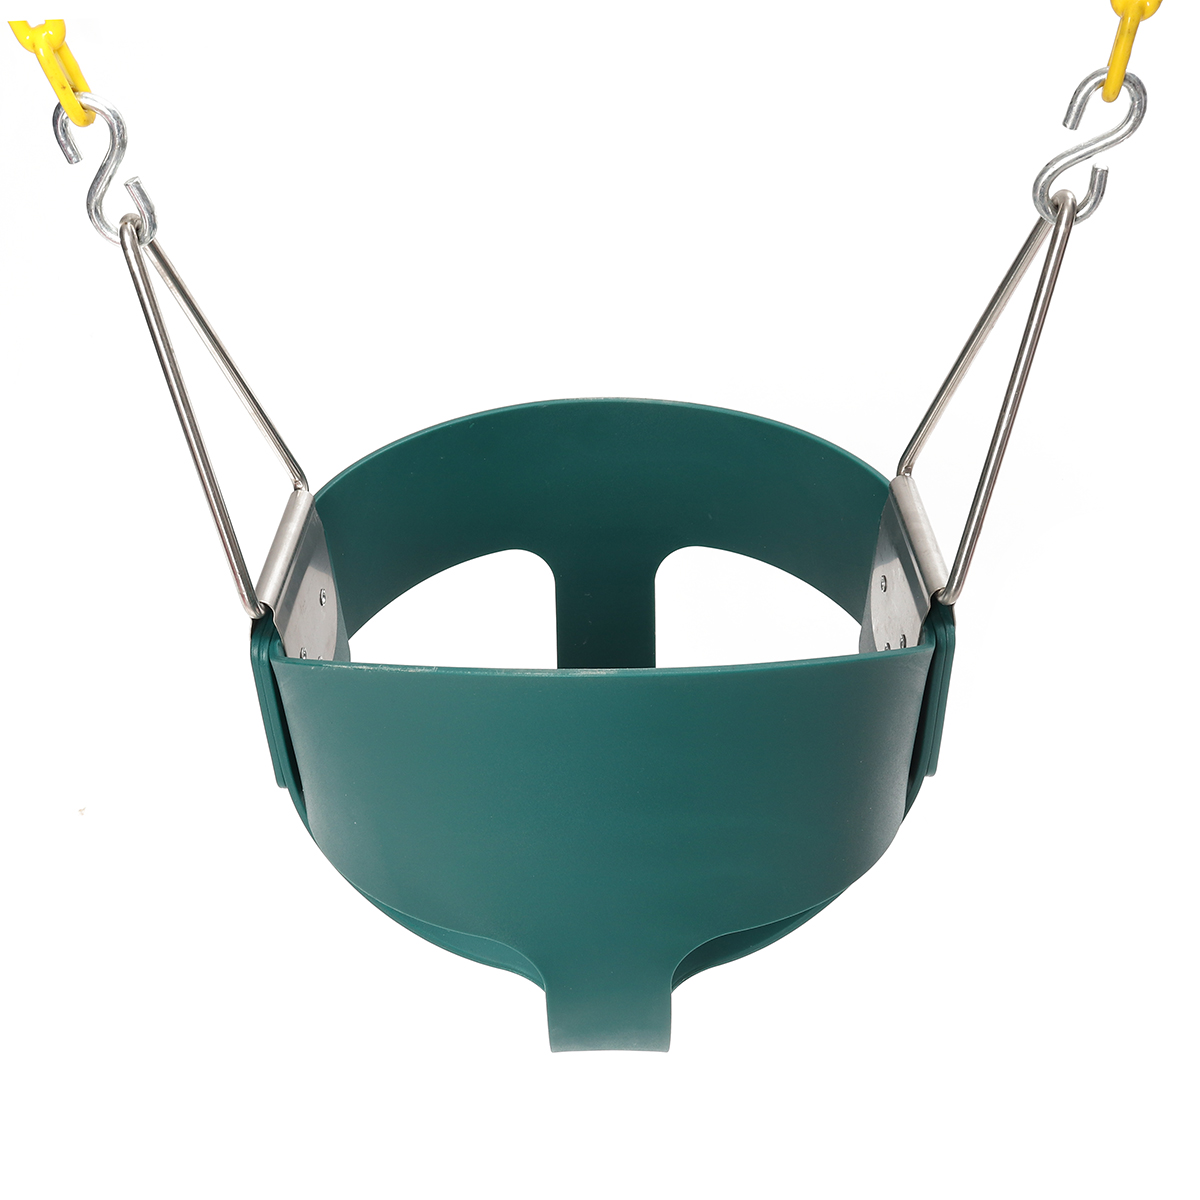 

Fully Assembled High Back Baby Swing Seat Full Bucket Toddler Playground Park Home Garden Cradle